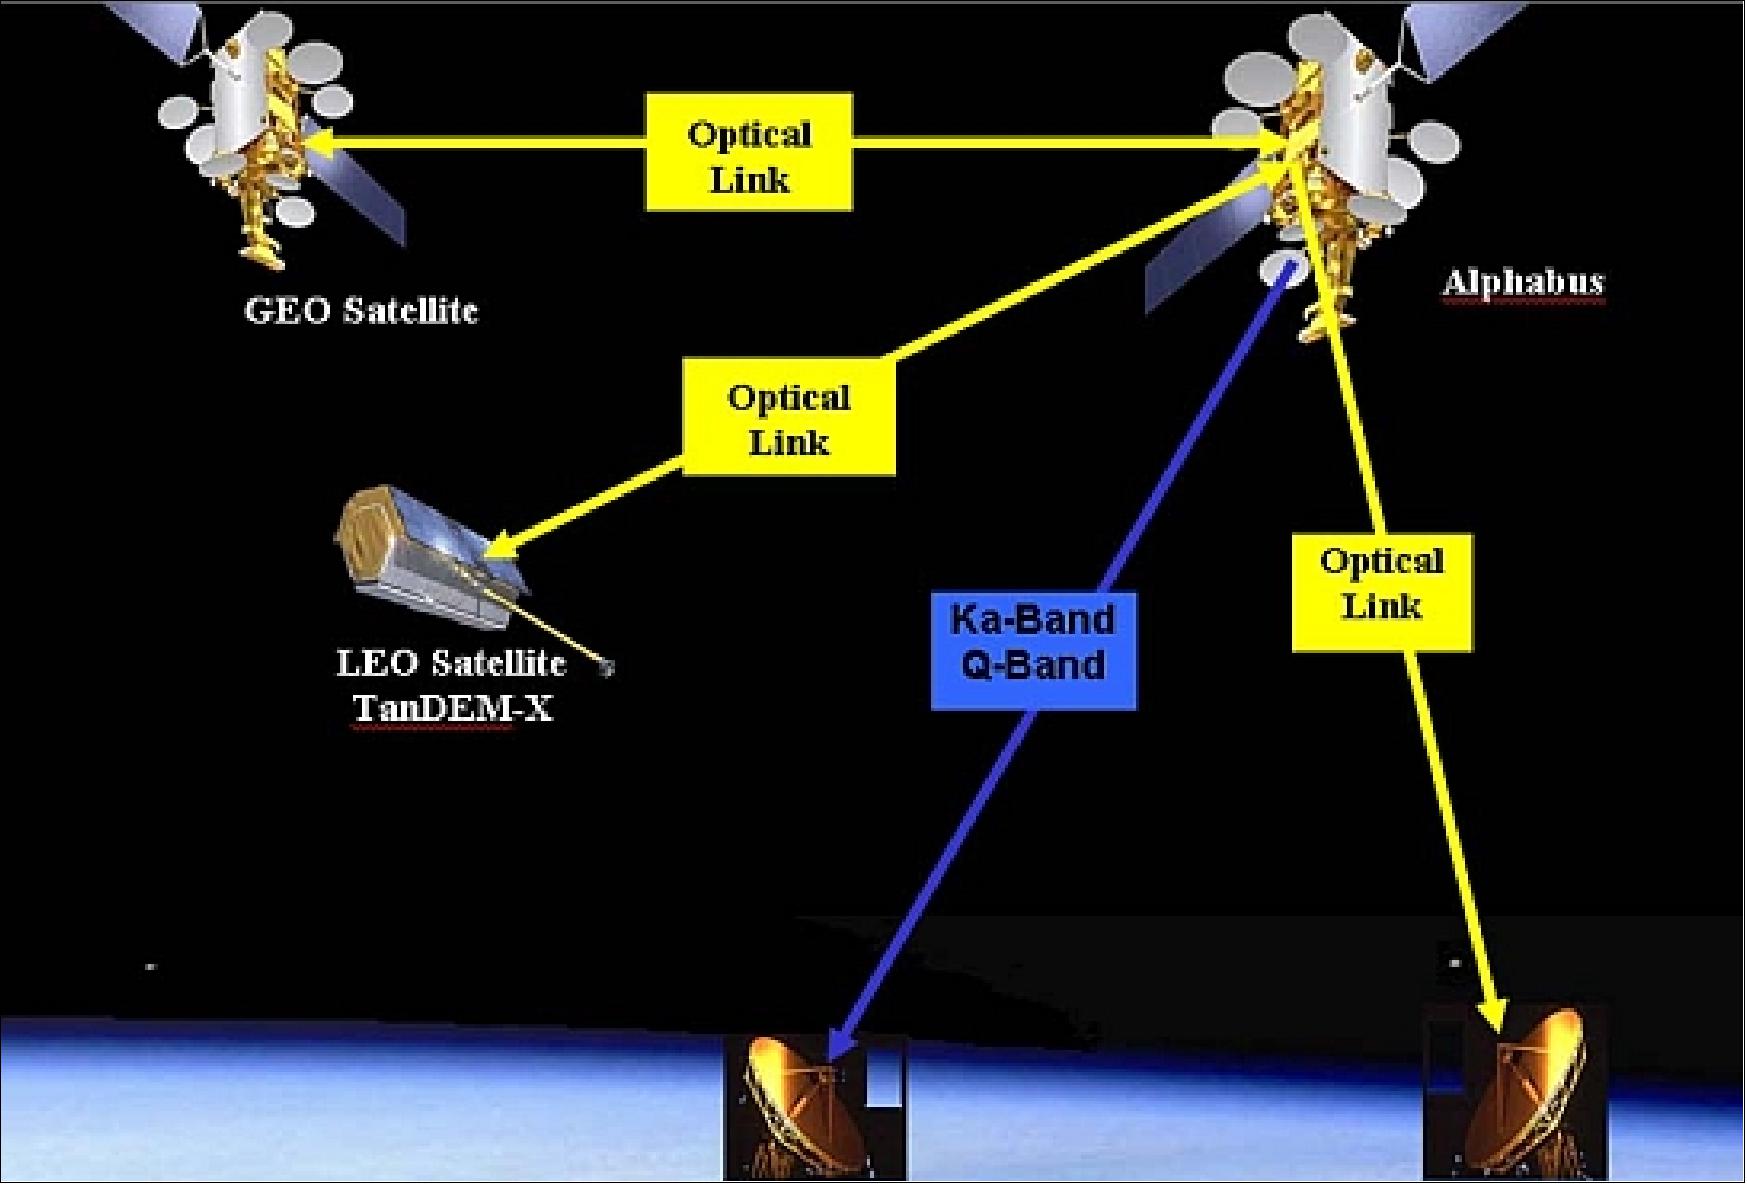 Figure 85: Future application scenario of the LCT payload on various spacecraft (image credit: ESA, Tesat)